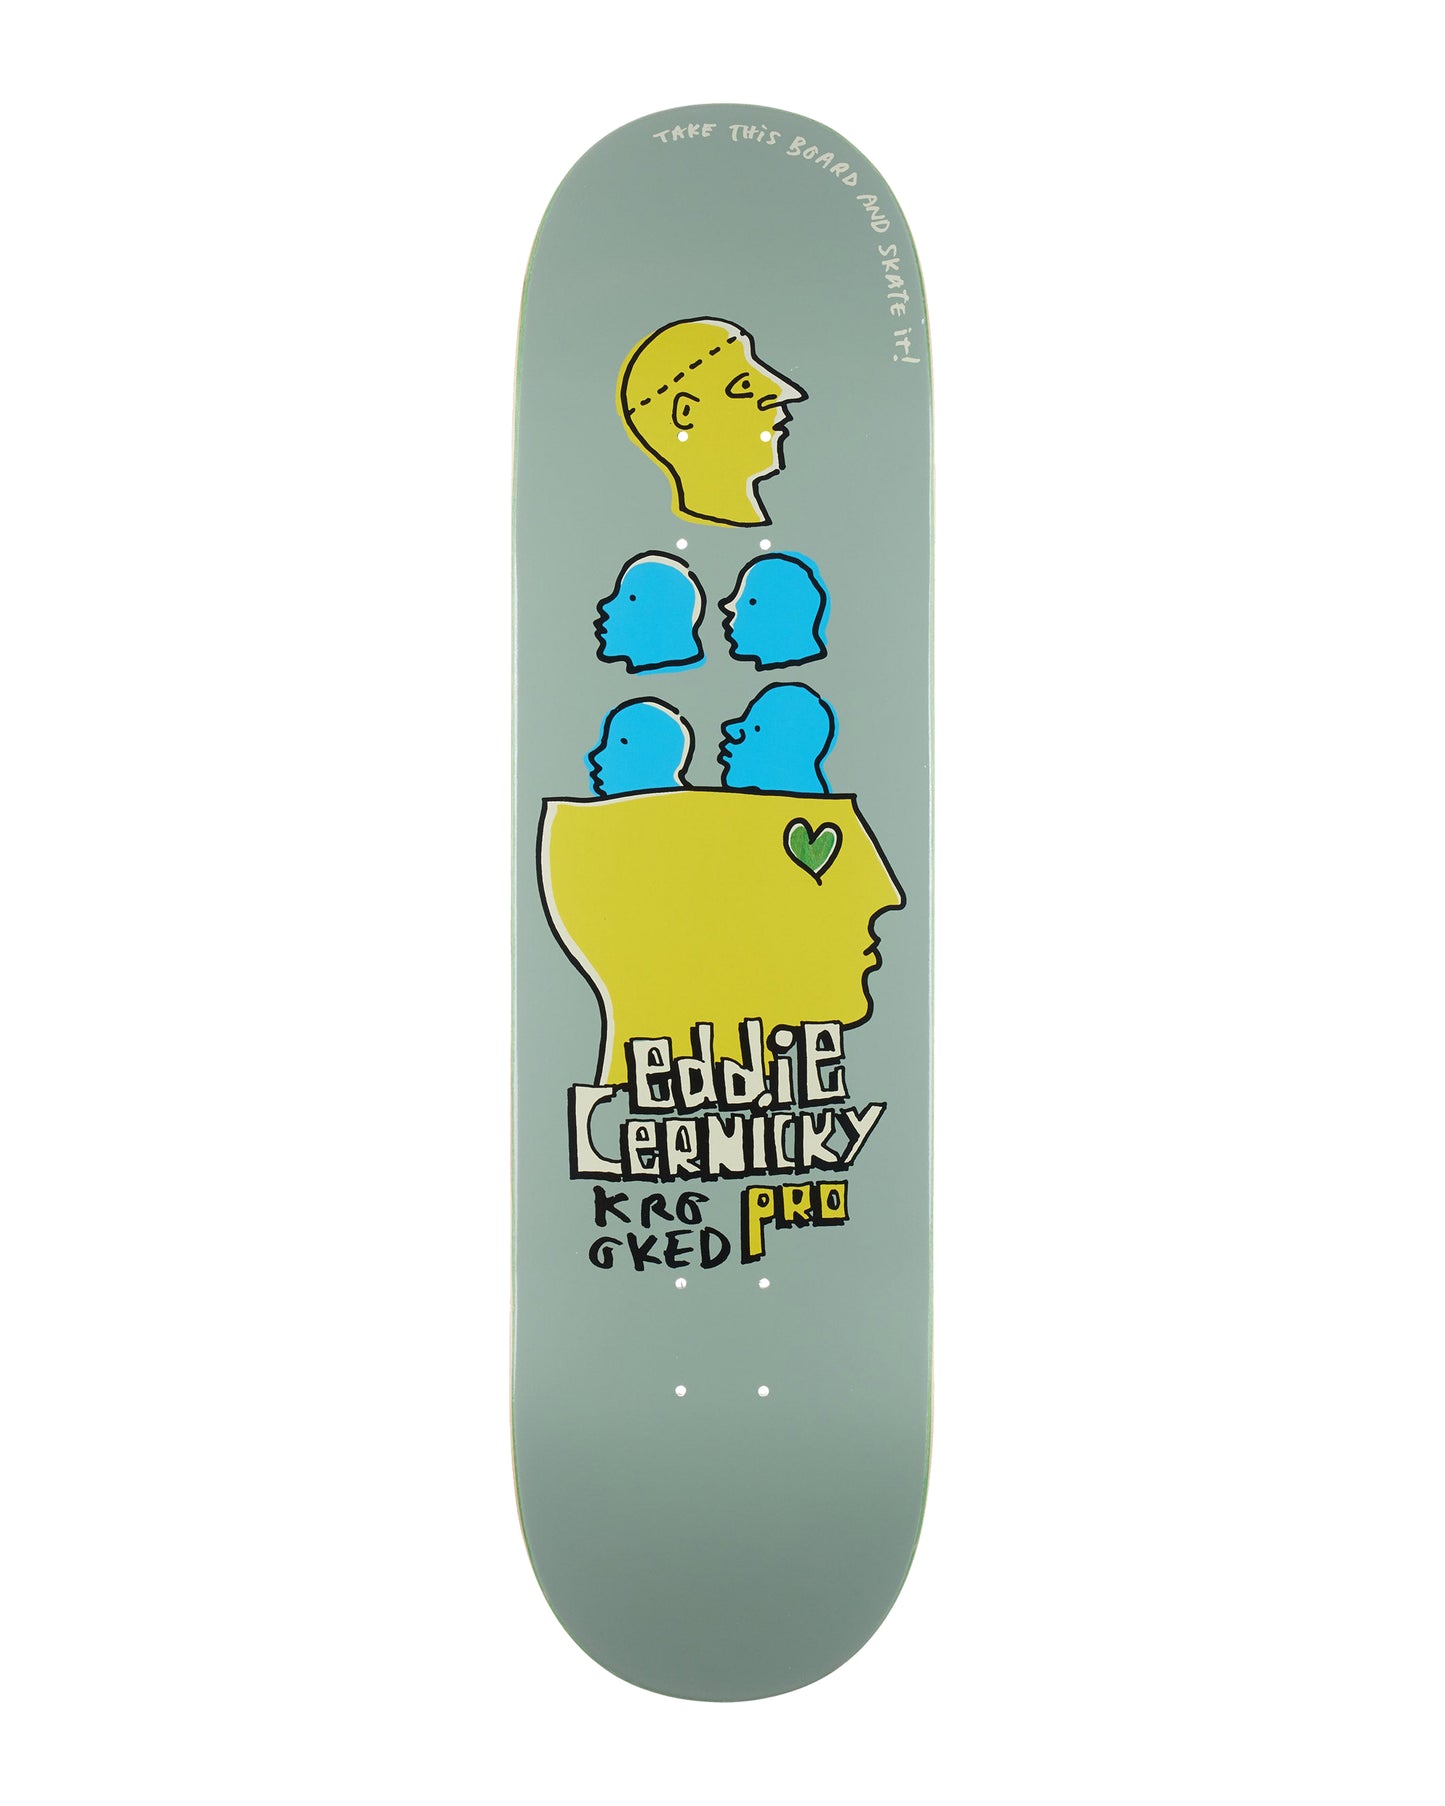 8.25 KROOKED CERNICKY TAKE THIS DECK